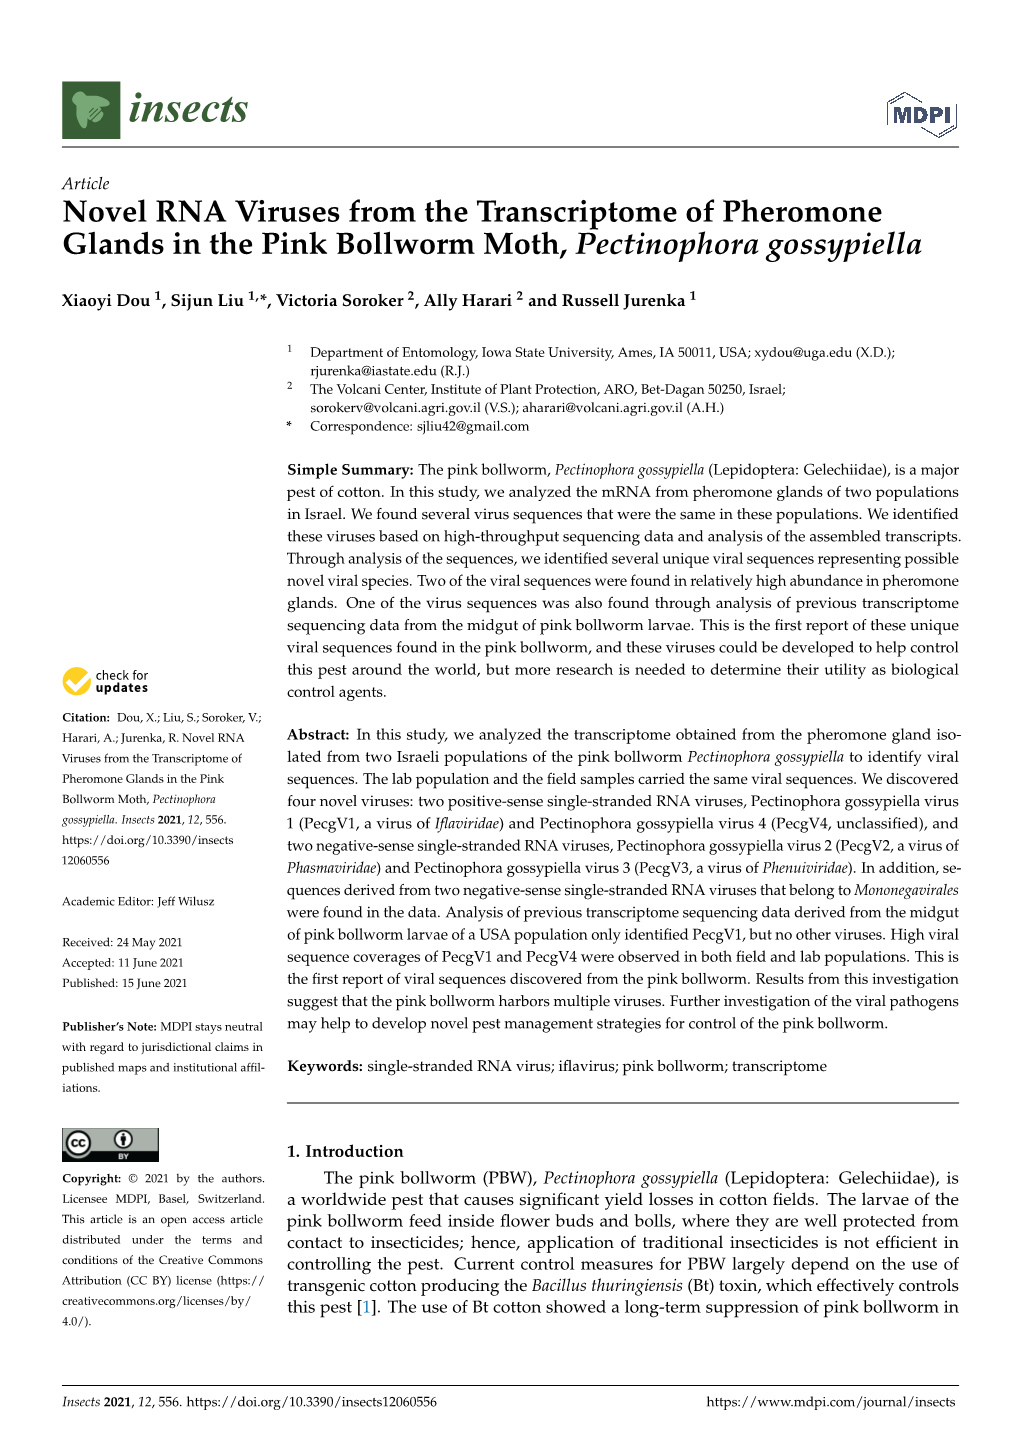 Novel RNA Viruses from the Transcriptome of Pheromone Glands in the Pink Bollworm Moth, Pectinophora Gossypiella